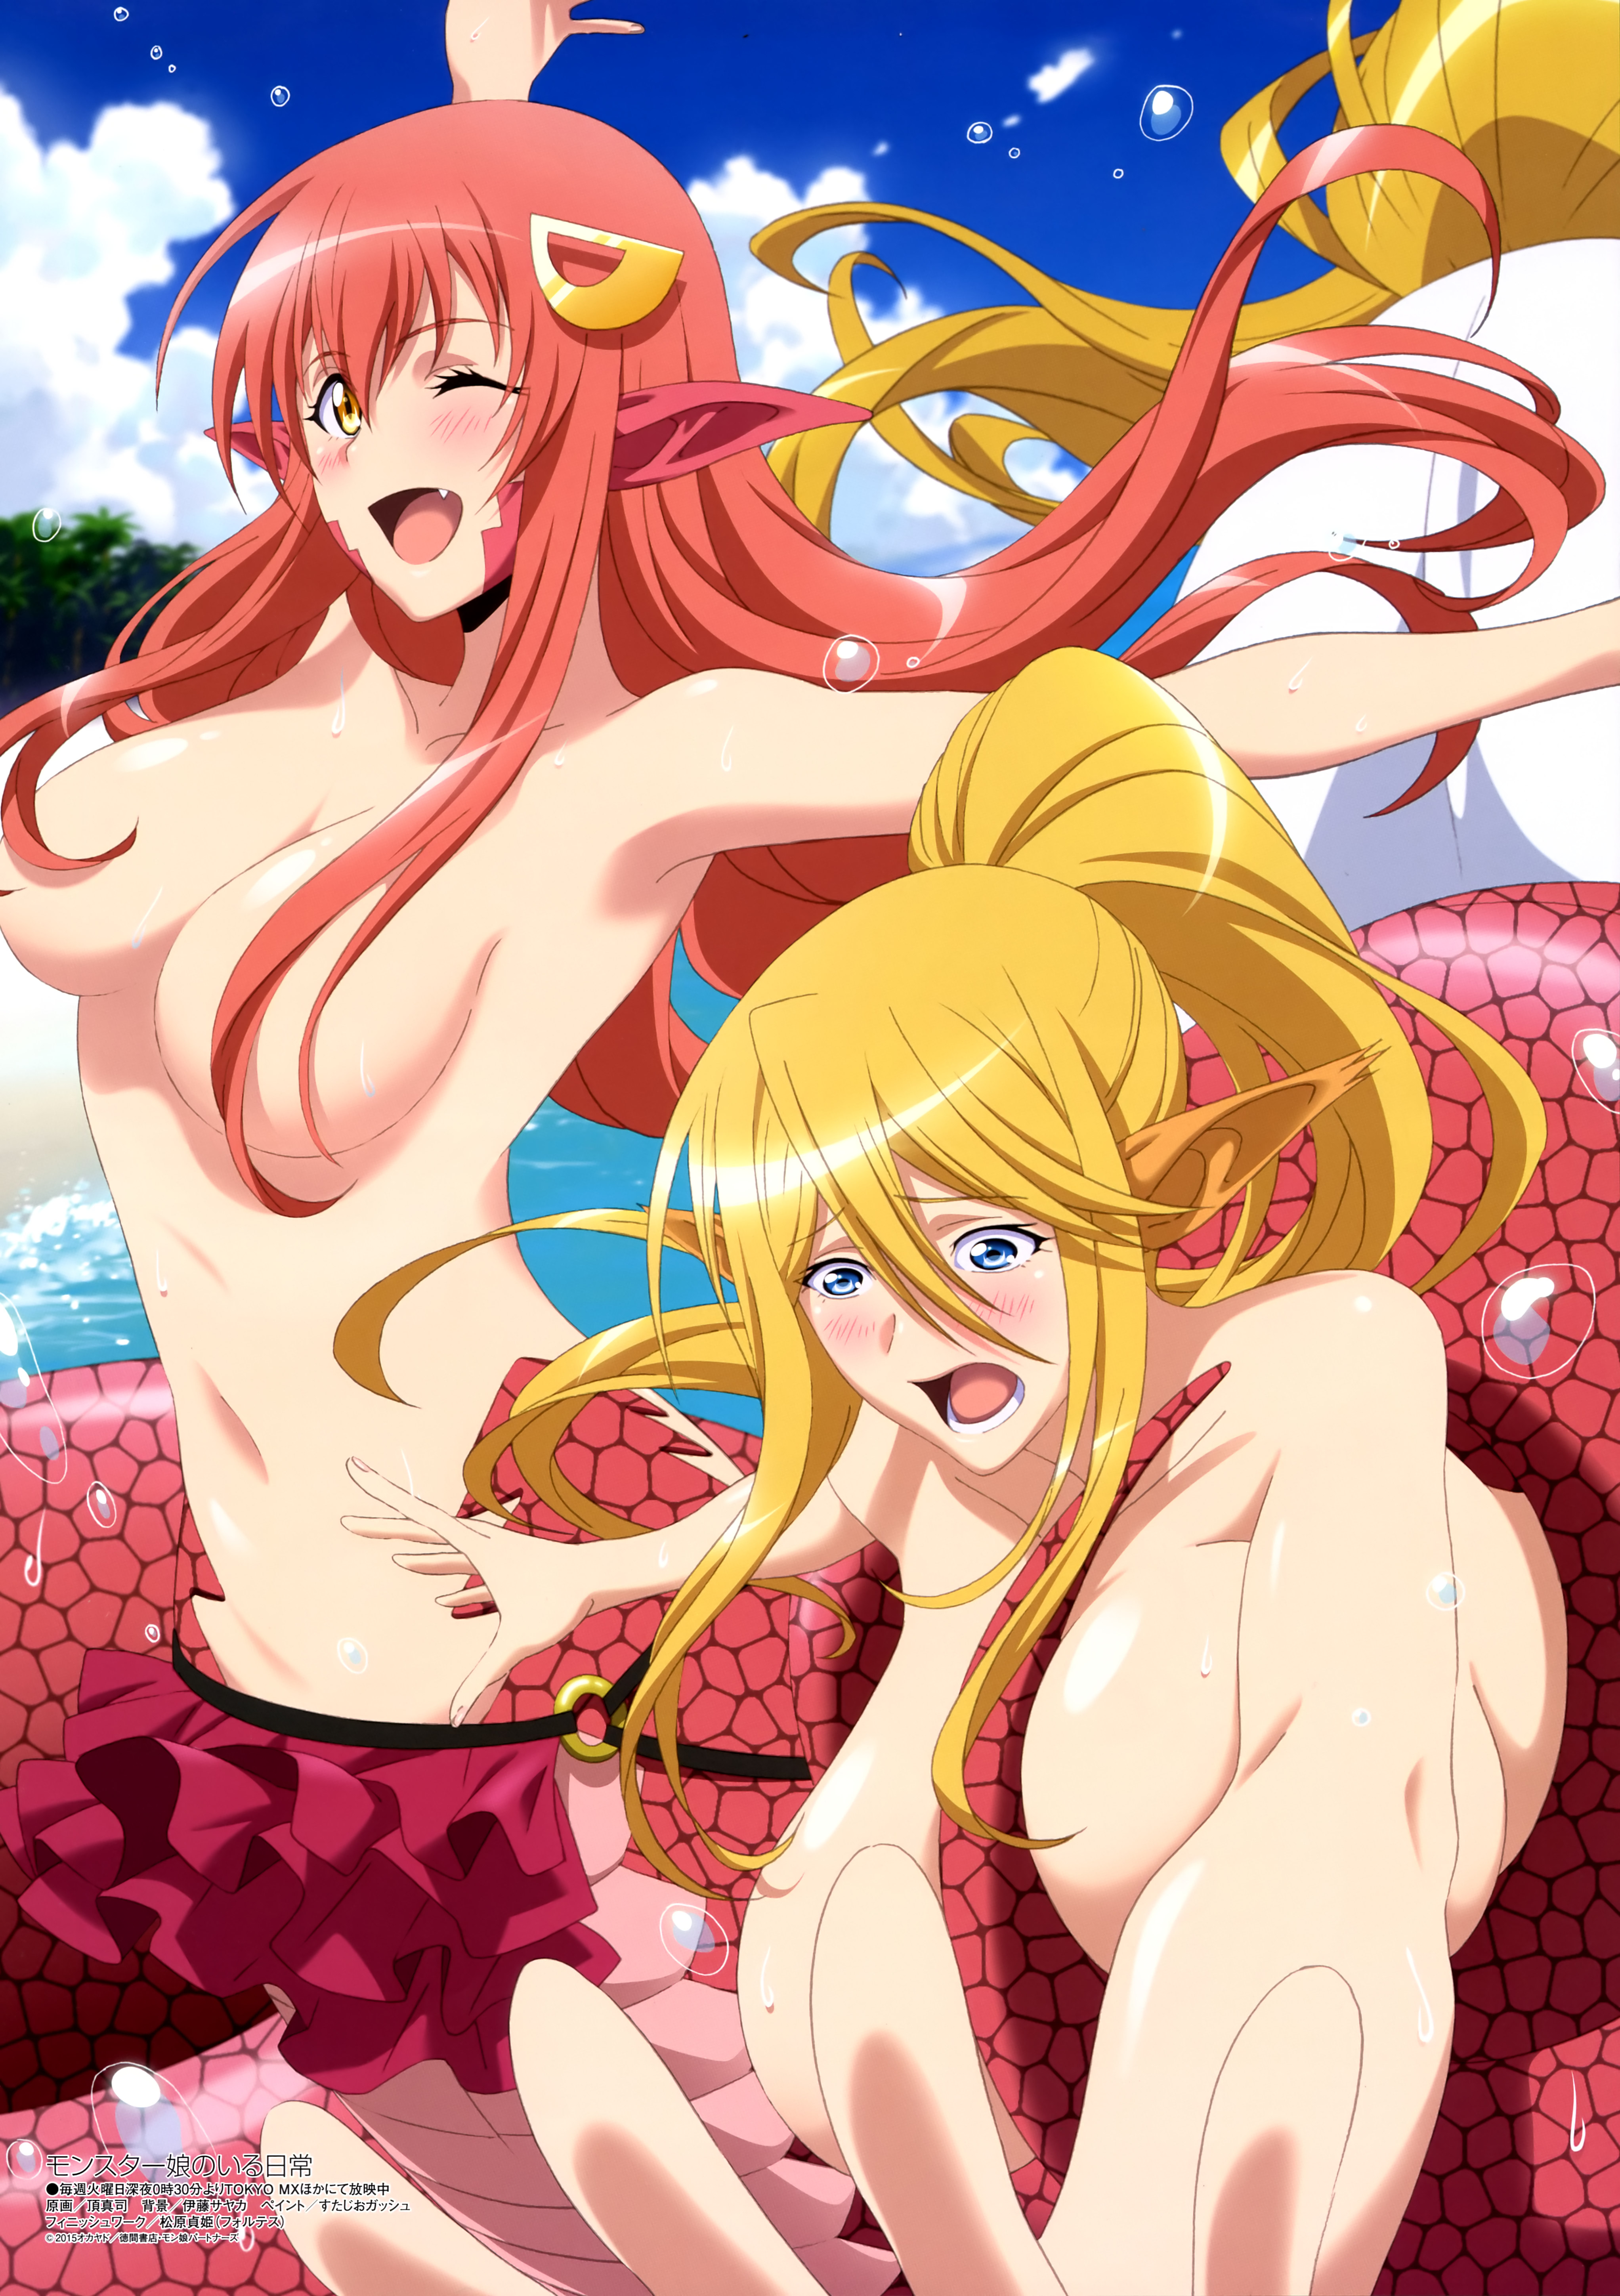 Monster Musume Megami Special issue magazine poster